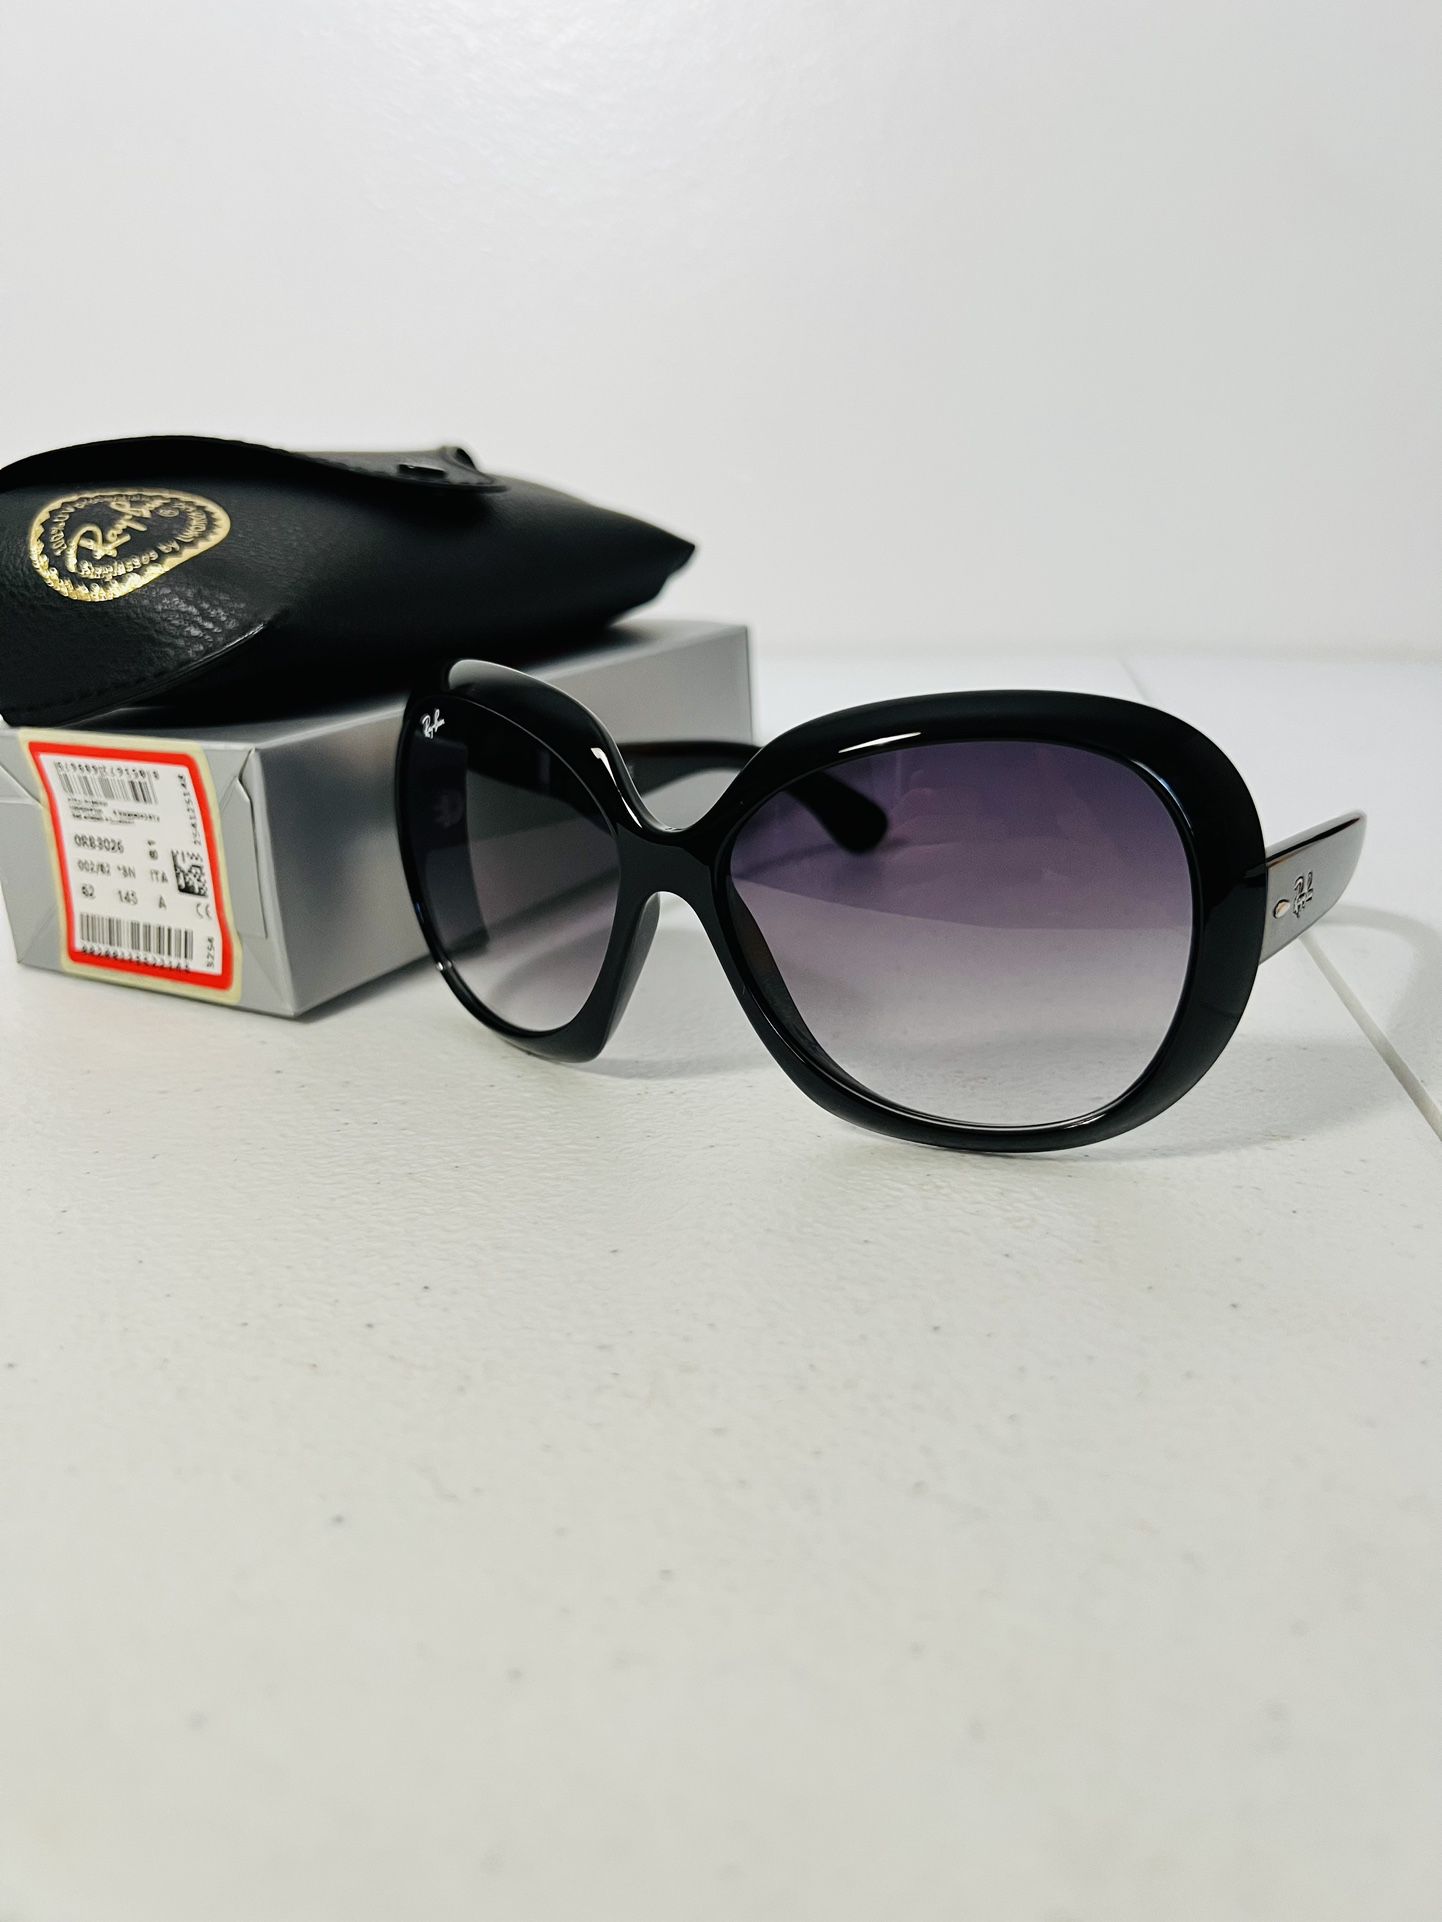 Jackie Ohh NEW RayBan Sunglasses with original Ray Ban Packaging 